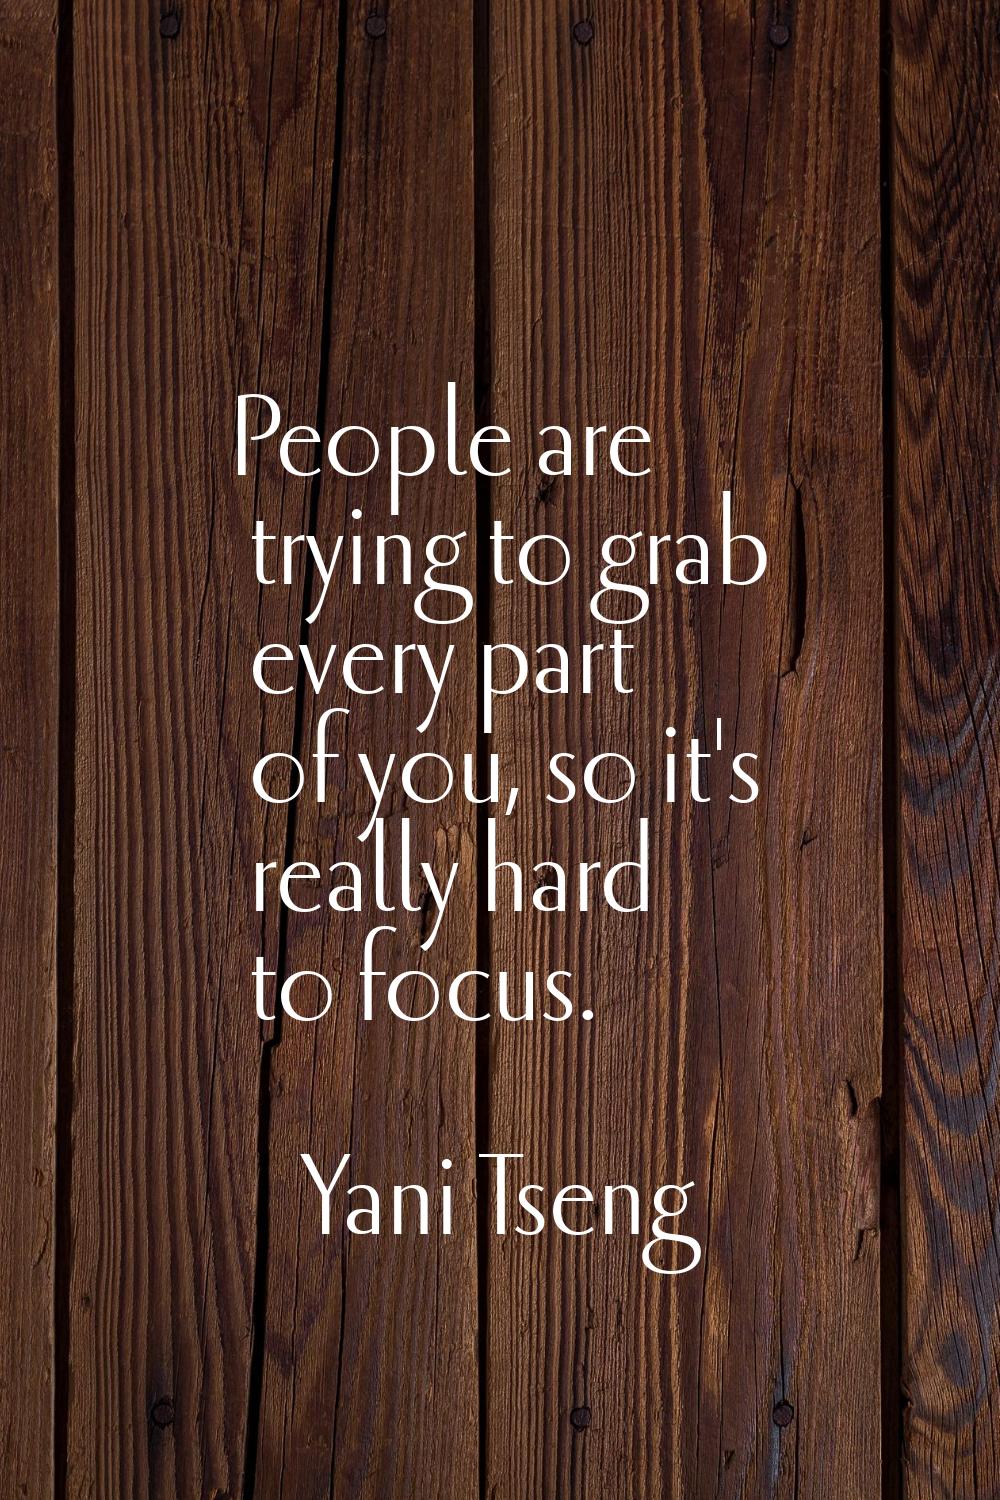 People are trying to grab every part of you, so it's really hard to focus.